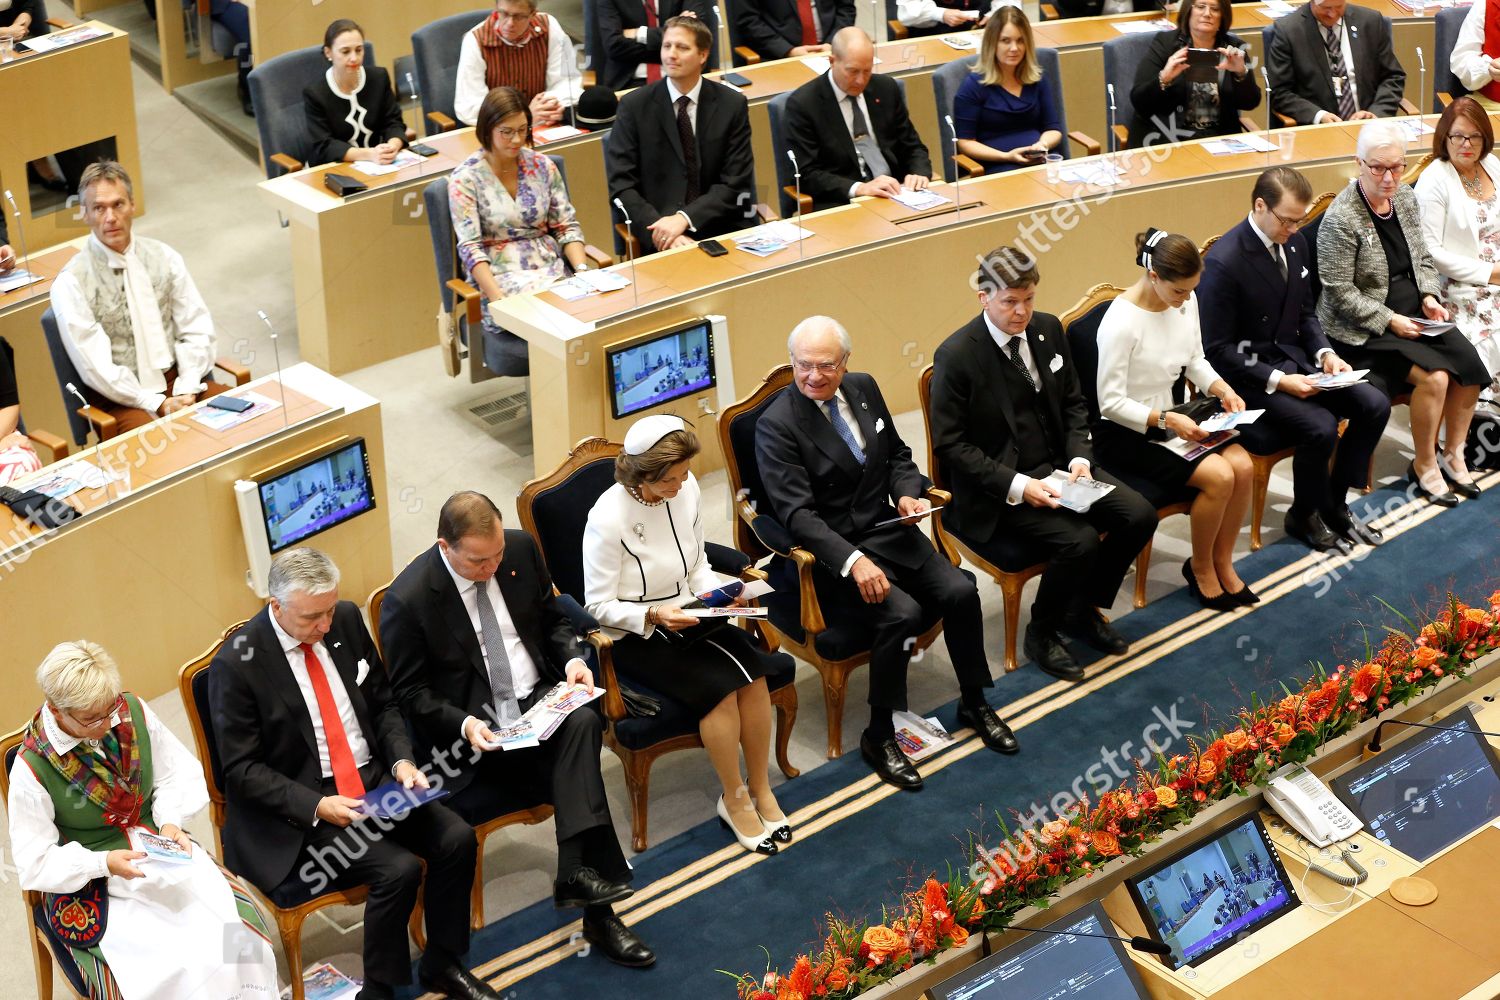 opening-of-the-parliamentary-session-stockholm-sweden-shutterstock-editorial-9894439j.jpg